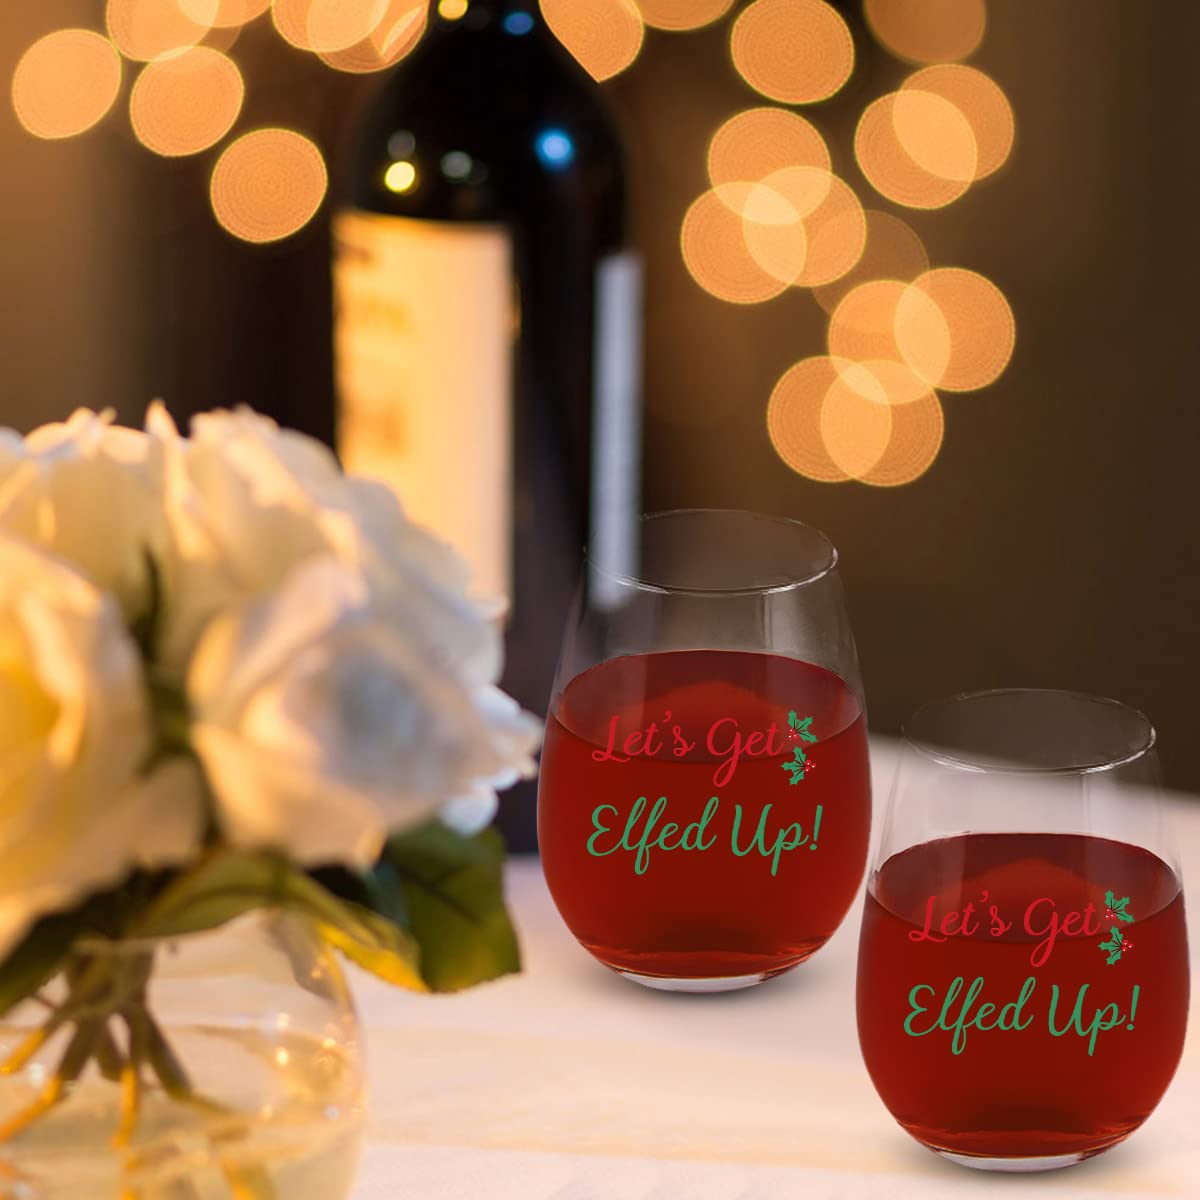 Modwnfy Funny Christmas Wine Glass Set, Let's Get Elfed Up Xmas Stemless Wine Glass for Women Friends Family Coworker, Good Wine Glasses for Christmas Wedding Birthday Party, Set of 4 (15 Oz)